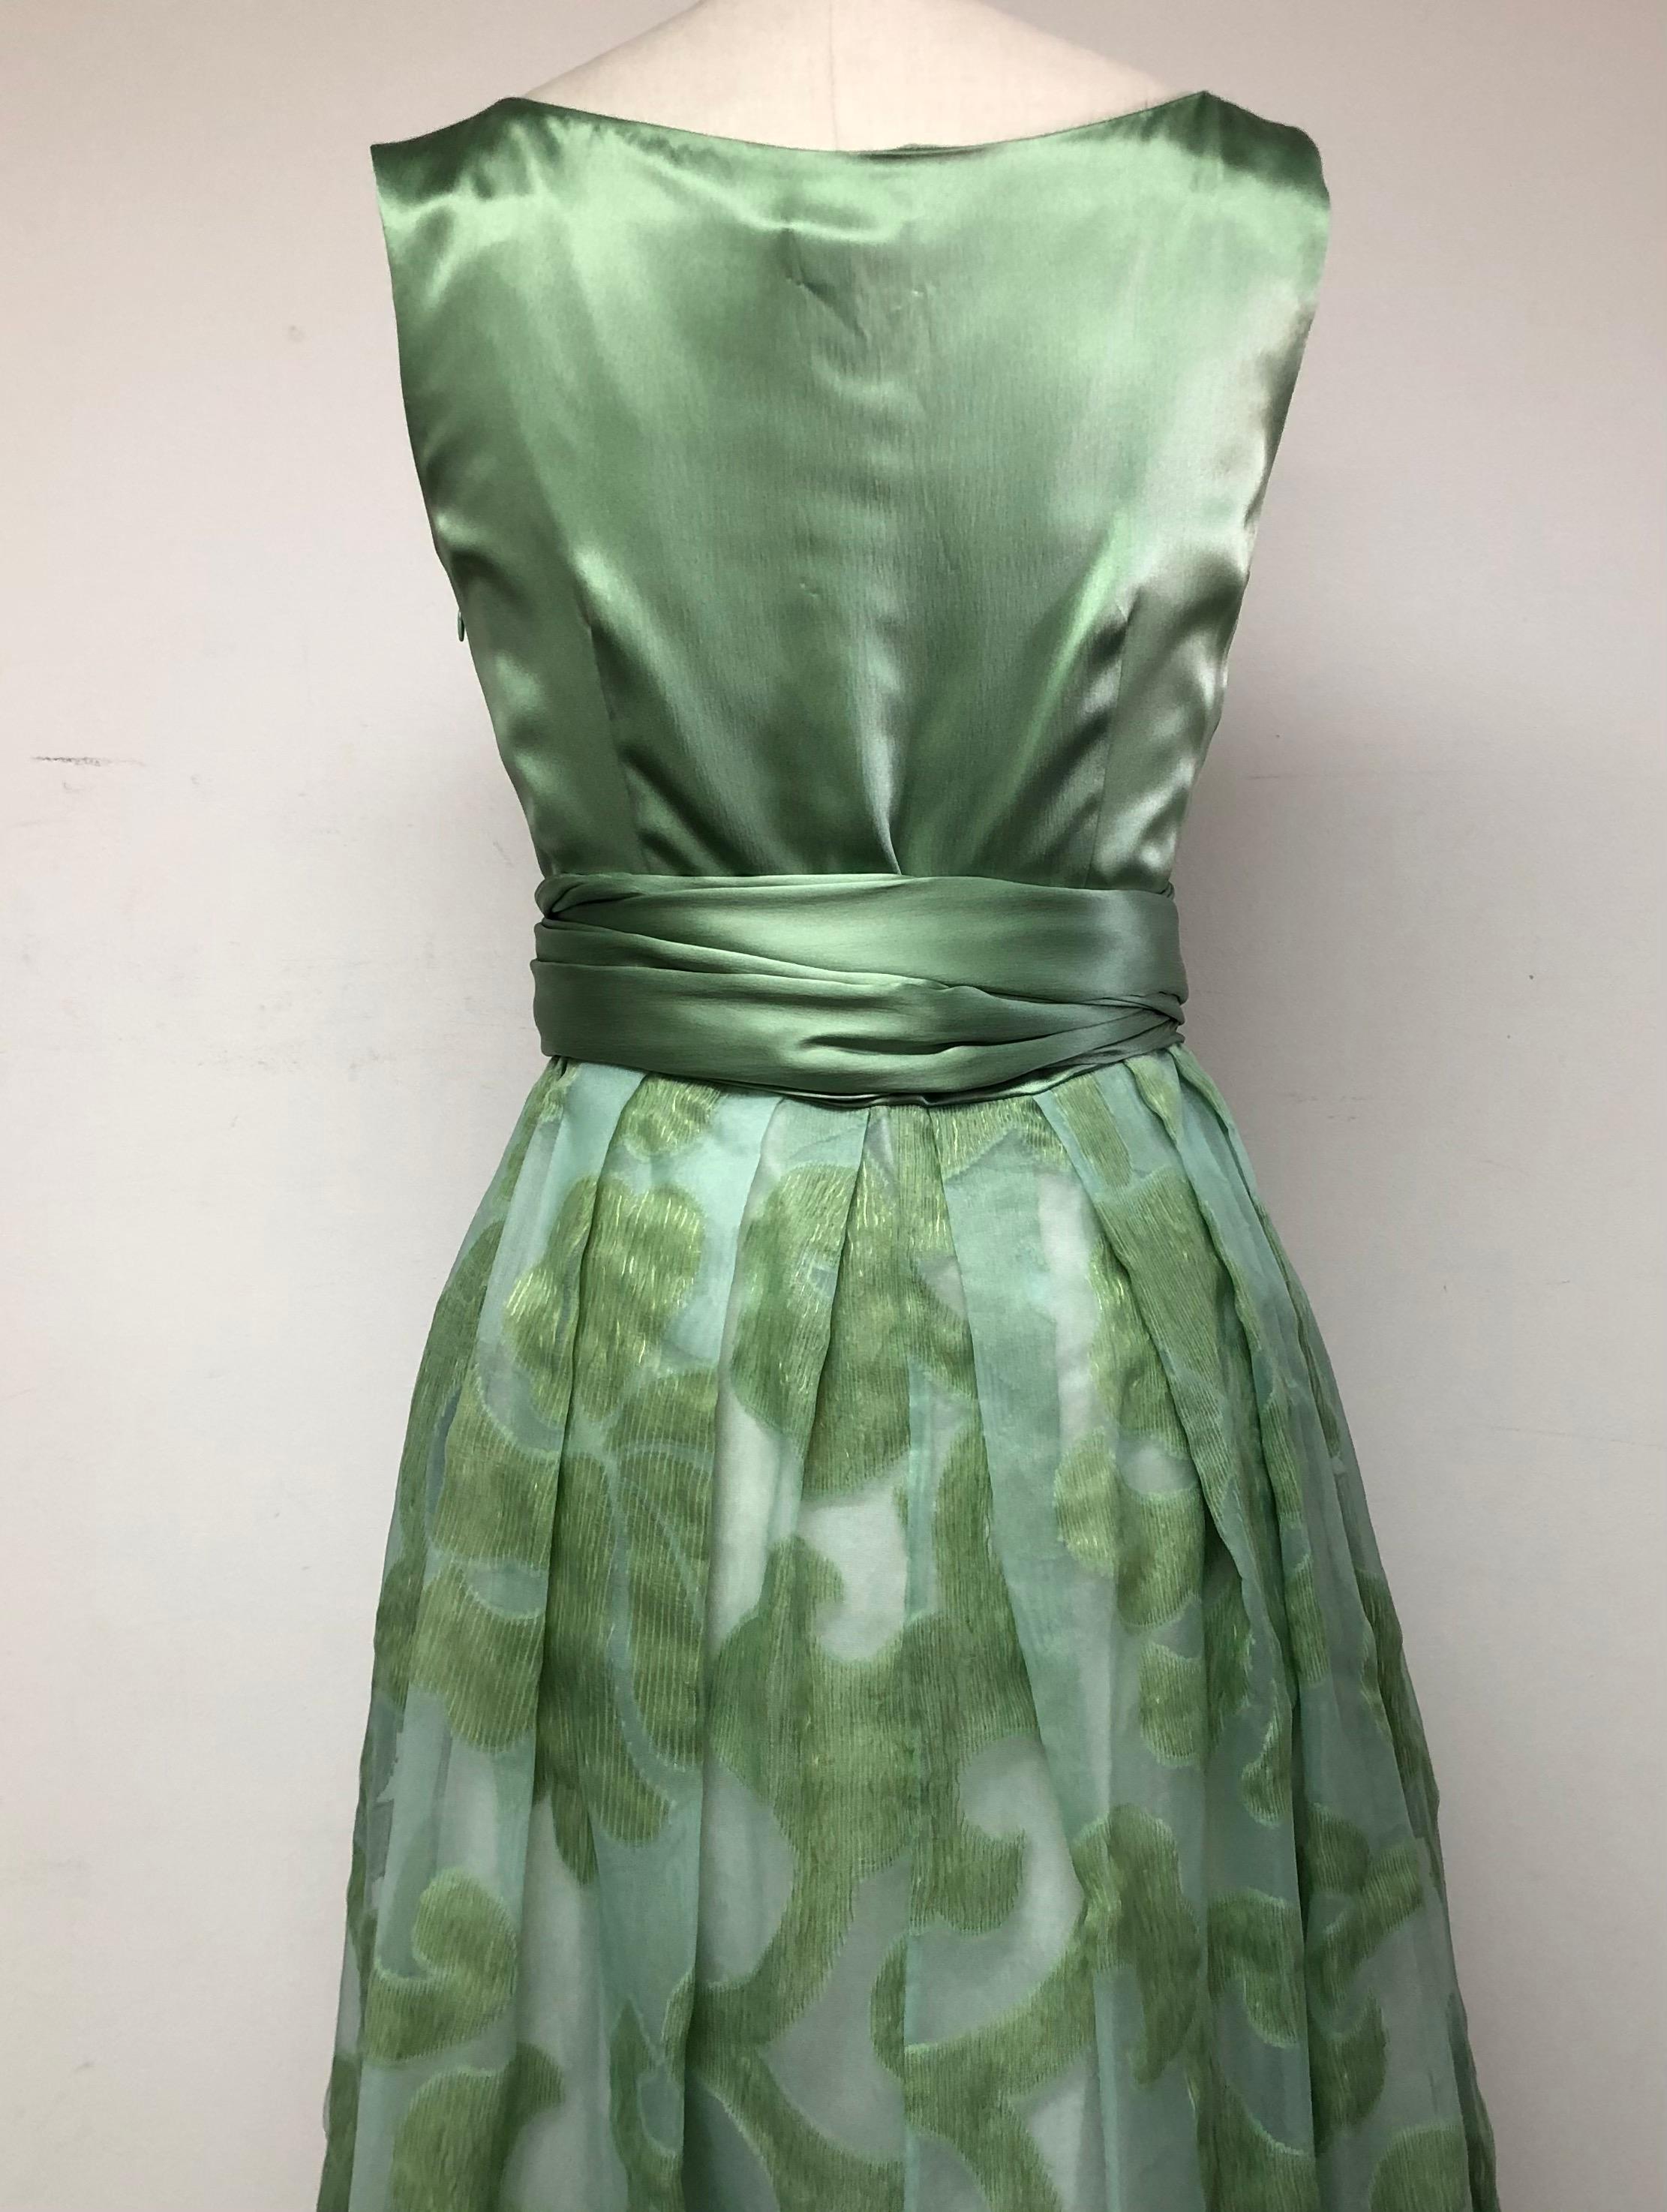 Sea Foam Green Satin and Fil Coupe Tucked Bodice Full Skirt Gown For Sale 2